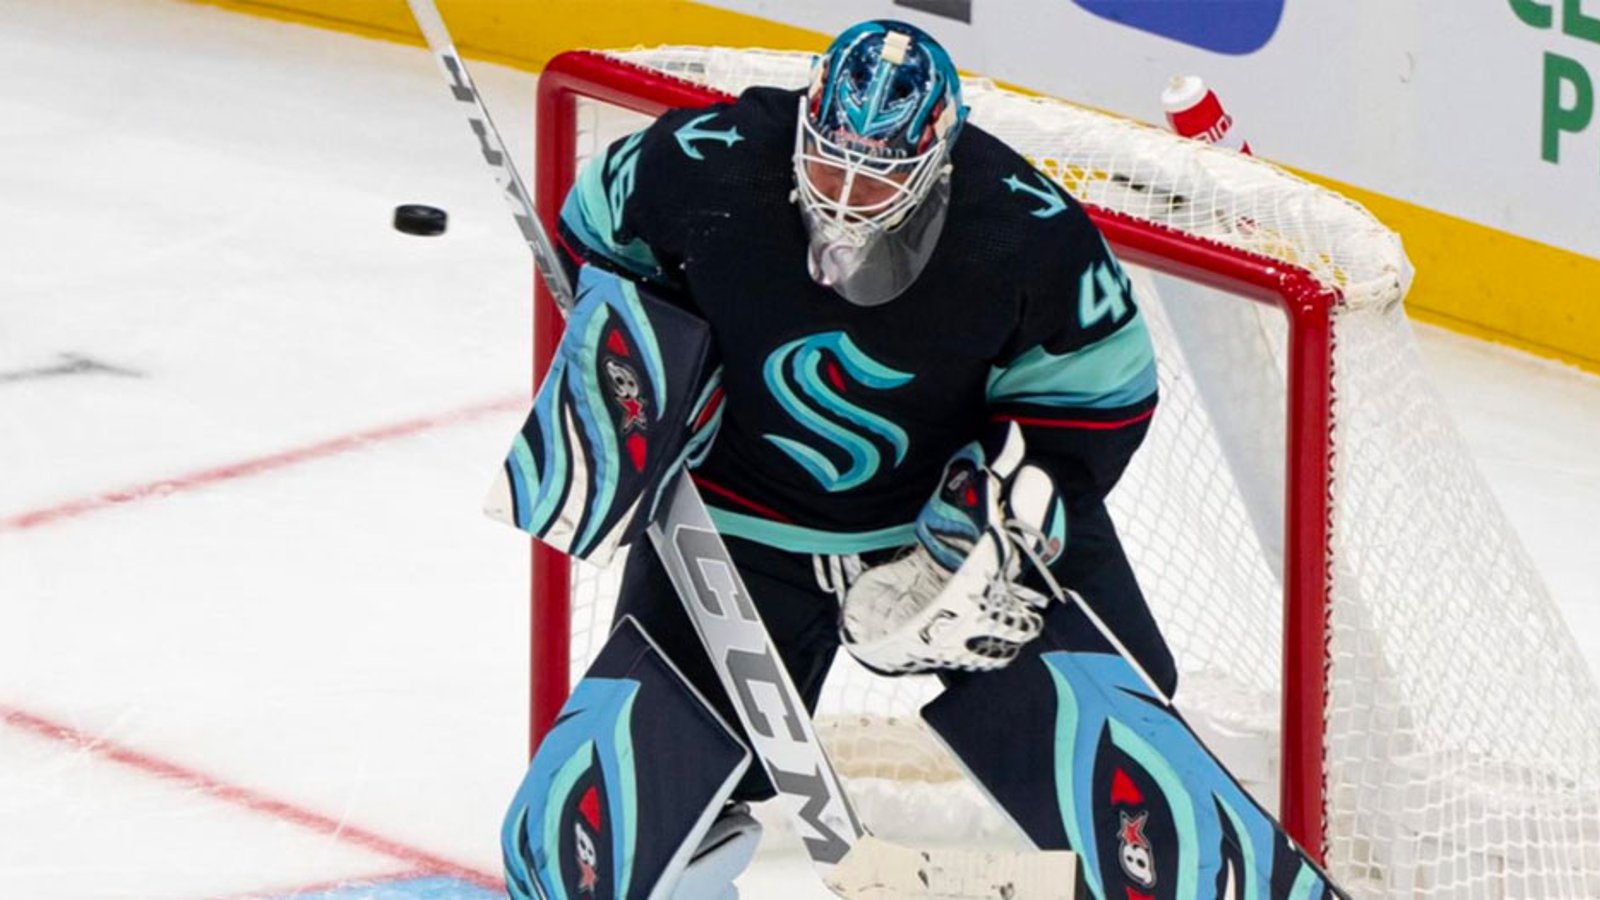 The NHL goalie carousel continues on the waiver wire today